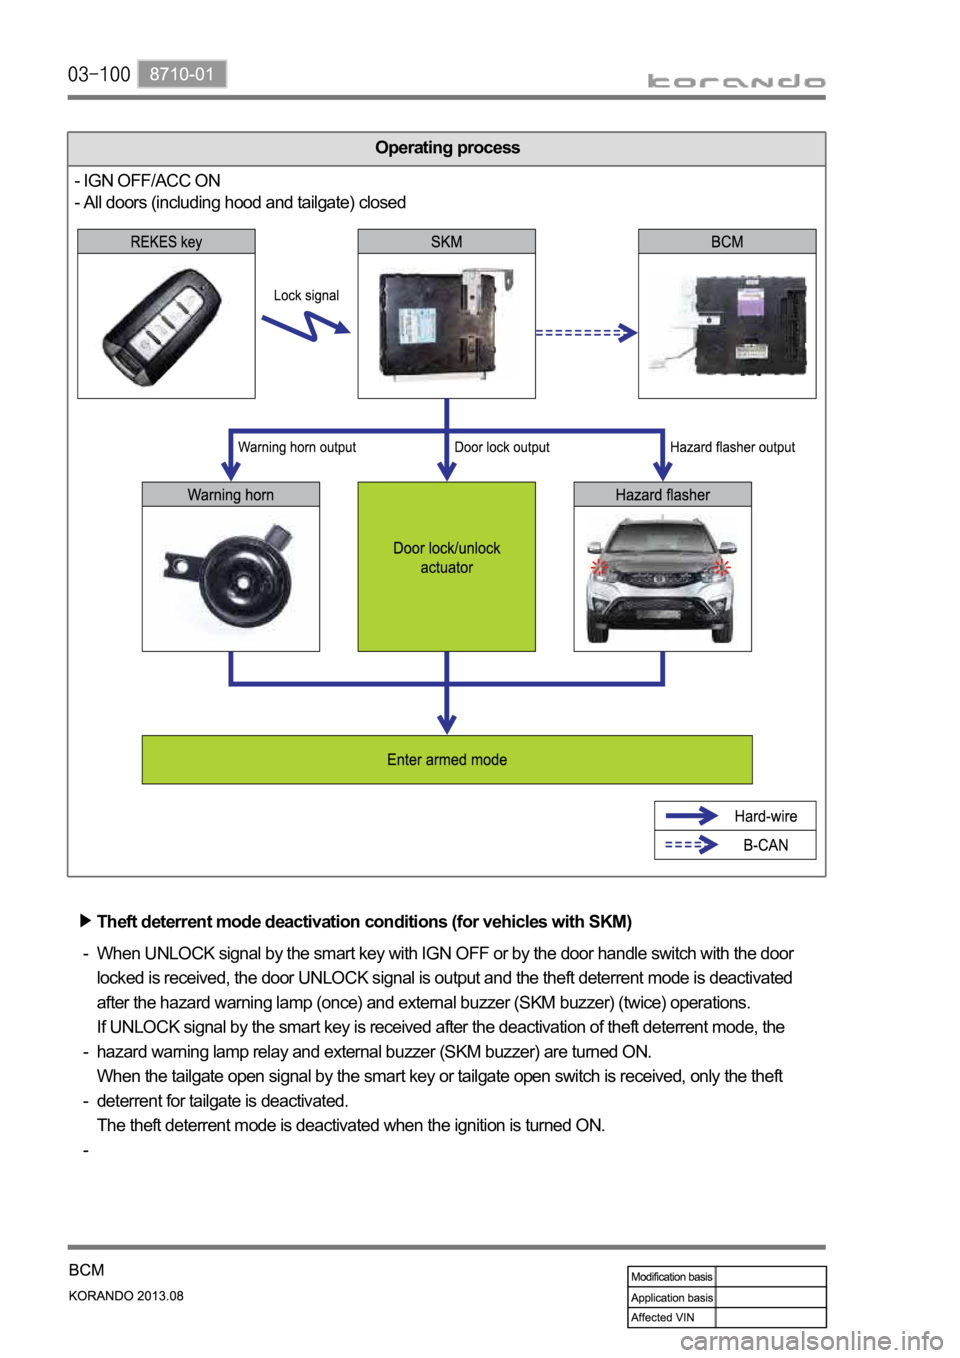 SSANGYONG KORANDO 2013  Service Manual Operating process
- IGN OFF/ACC ON
- All doors (including hood and tailgate) closed
Theft deterrent mode deactivation conditions (for vehicles with SKM)
When UNLOCK signal by the smart key with IGN OF